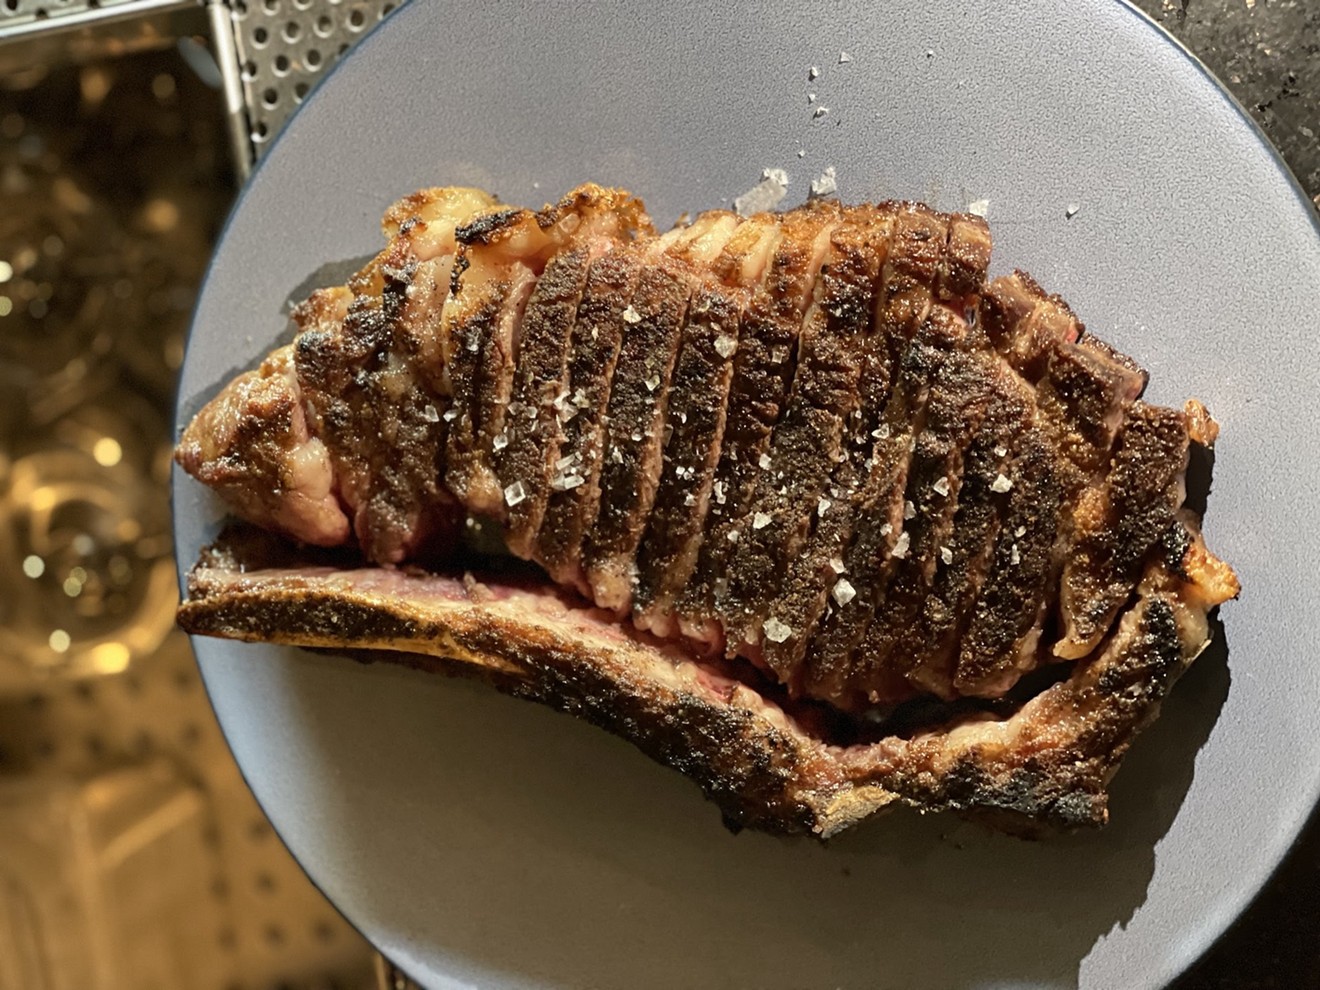 Knife Plano is hosting a Texas wagyu beef purveyor, Cowboy Wagyu, along with Frias Vineyard wines Thursday, Aug. 4